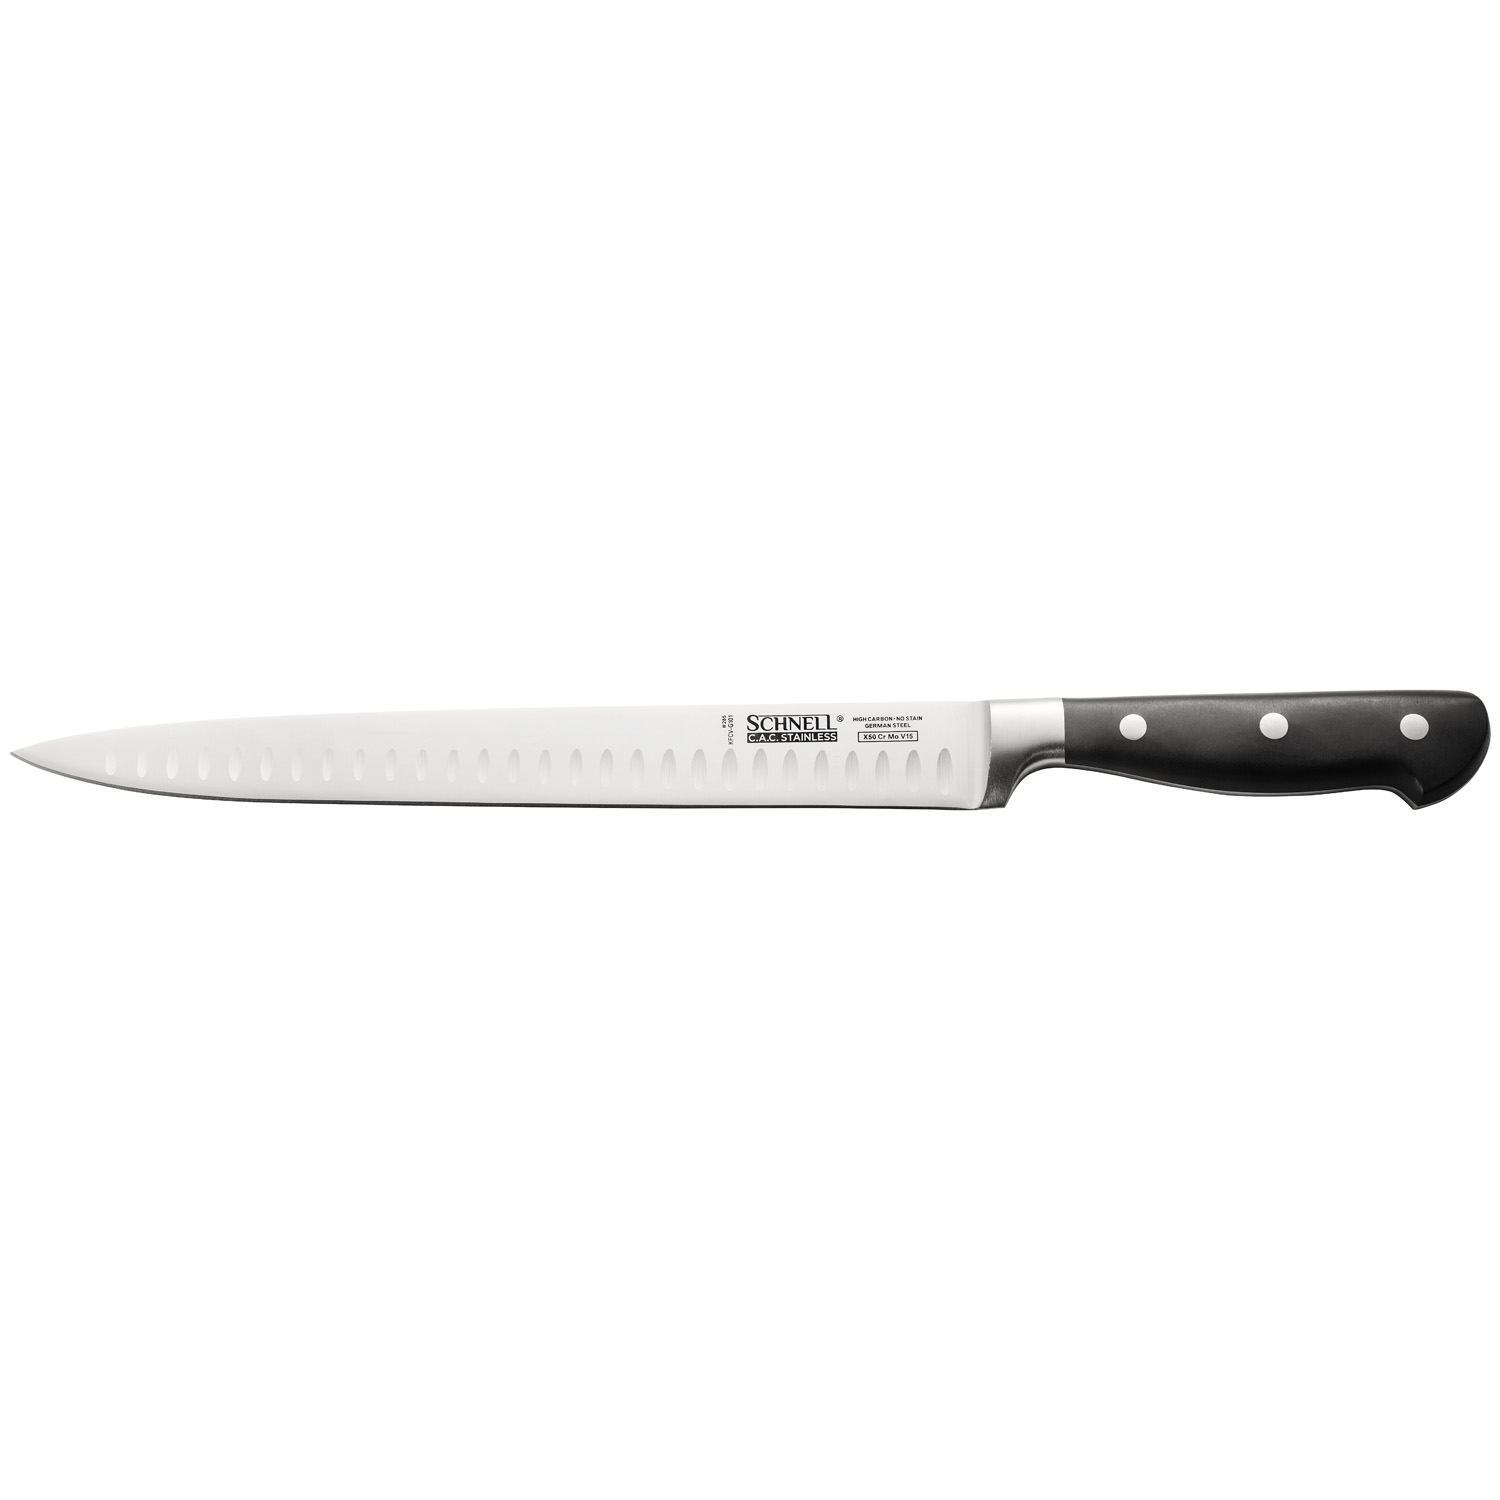 CAC China KFCV-G101 Schnell Forged Carving Knife with Granton Edge 10"